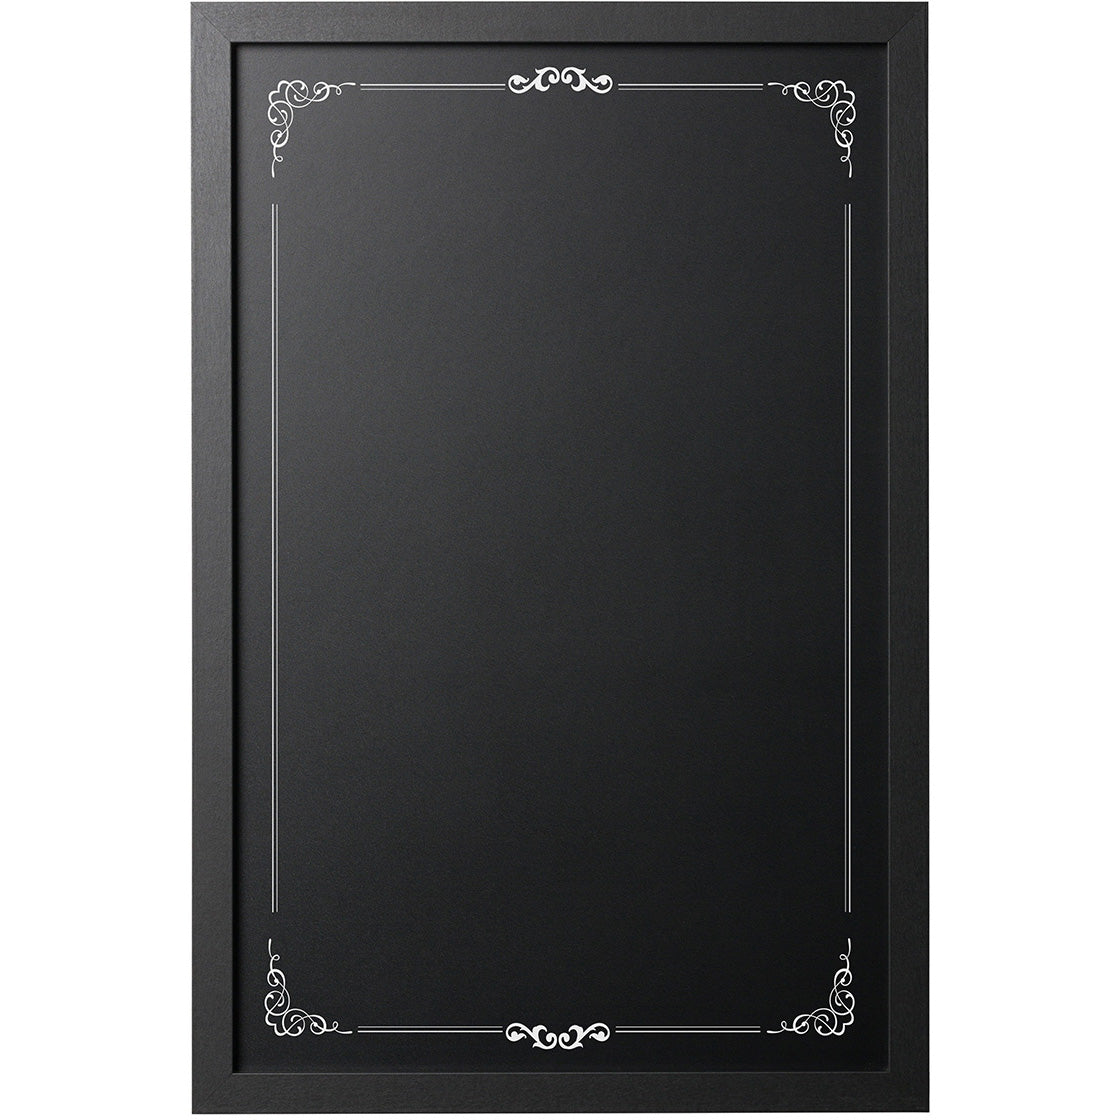 PM0331168 Decorative Border Chalkboard, Wall Mount Vertical or Horizontal, Perfect for Home Kitchen, 16" x 24", Black Frame by MasterVision